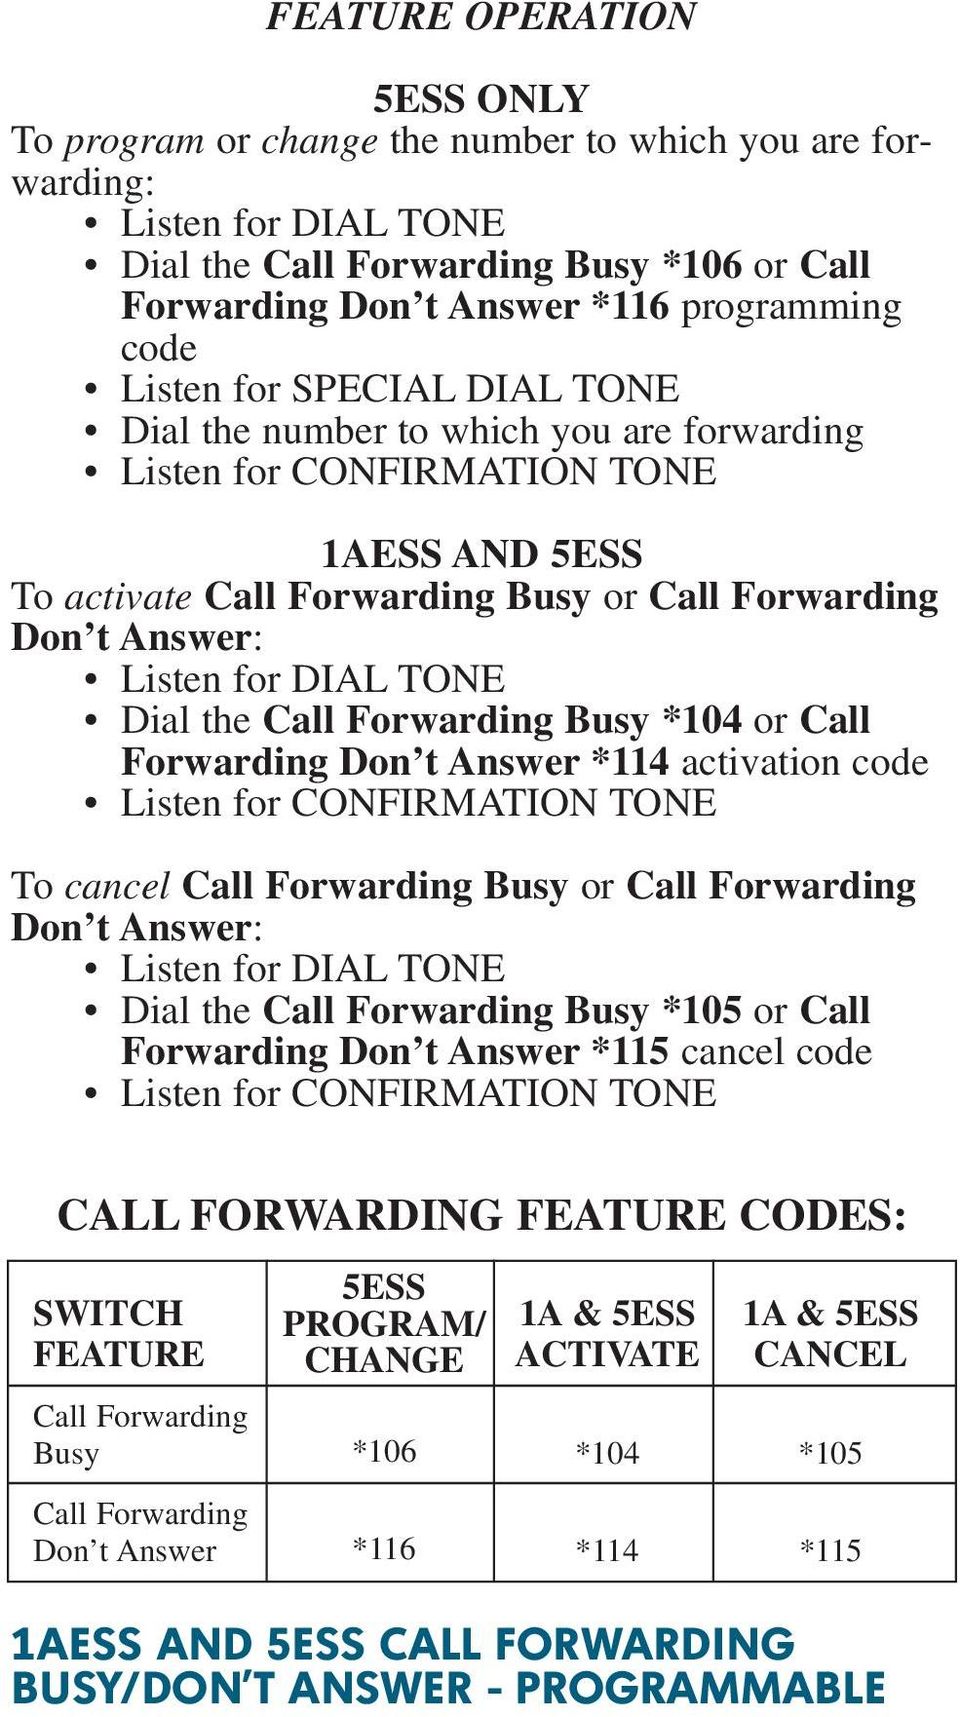 Answer *114 activation code Listen for CONFIRMATION TONE To cancel Call Forwarding Busy or Call Forwarding Don t Answer: Dial the Call Forwarding Busy *105 or Call Forwarding Don t Answer *115 cancel